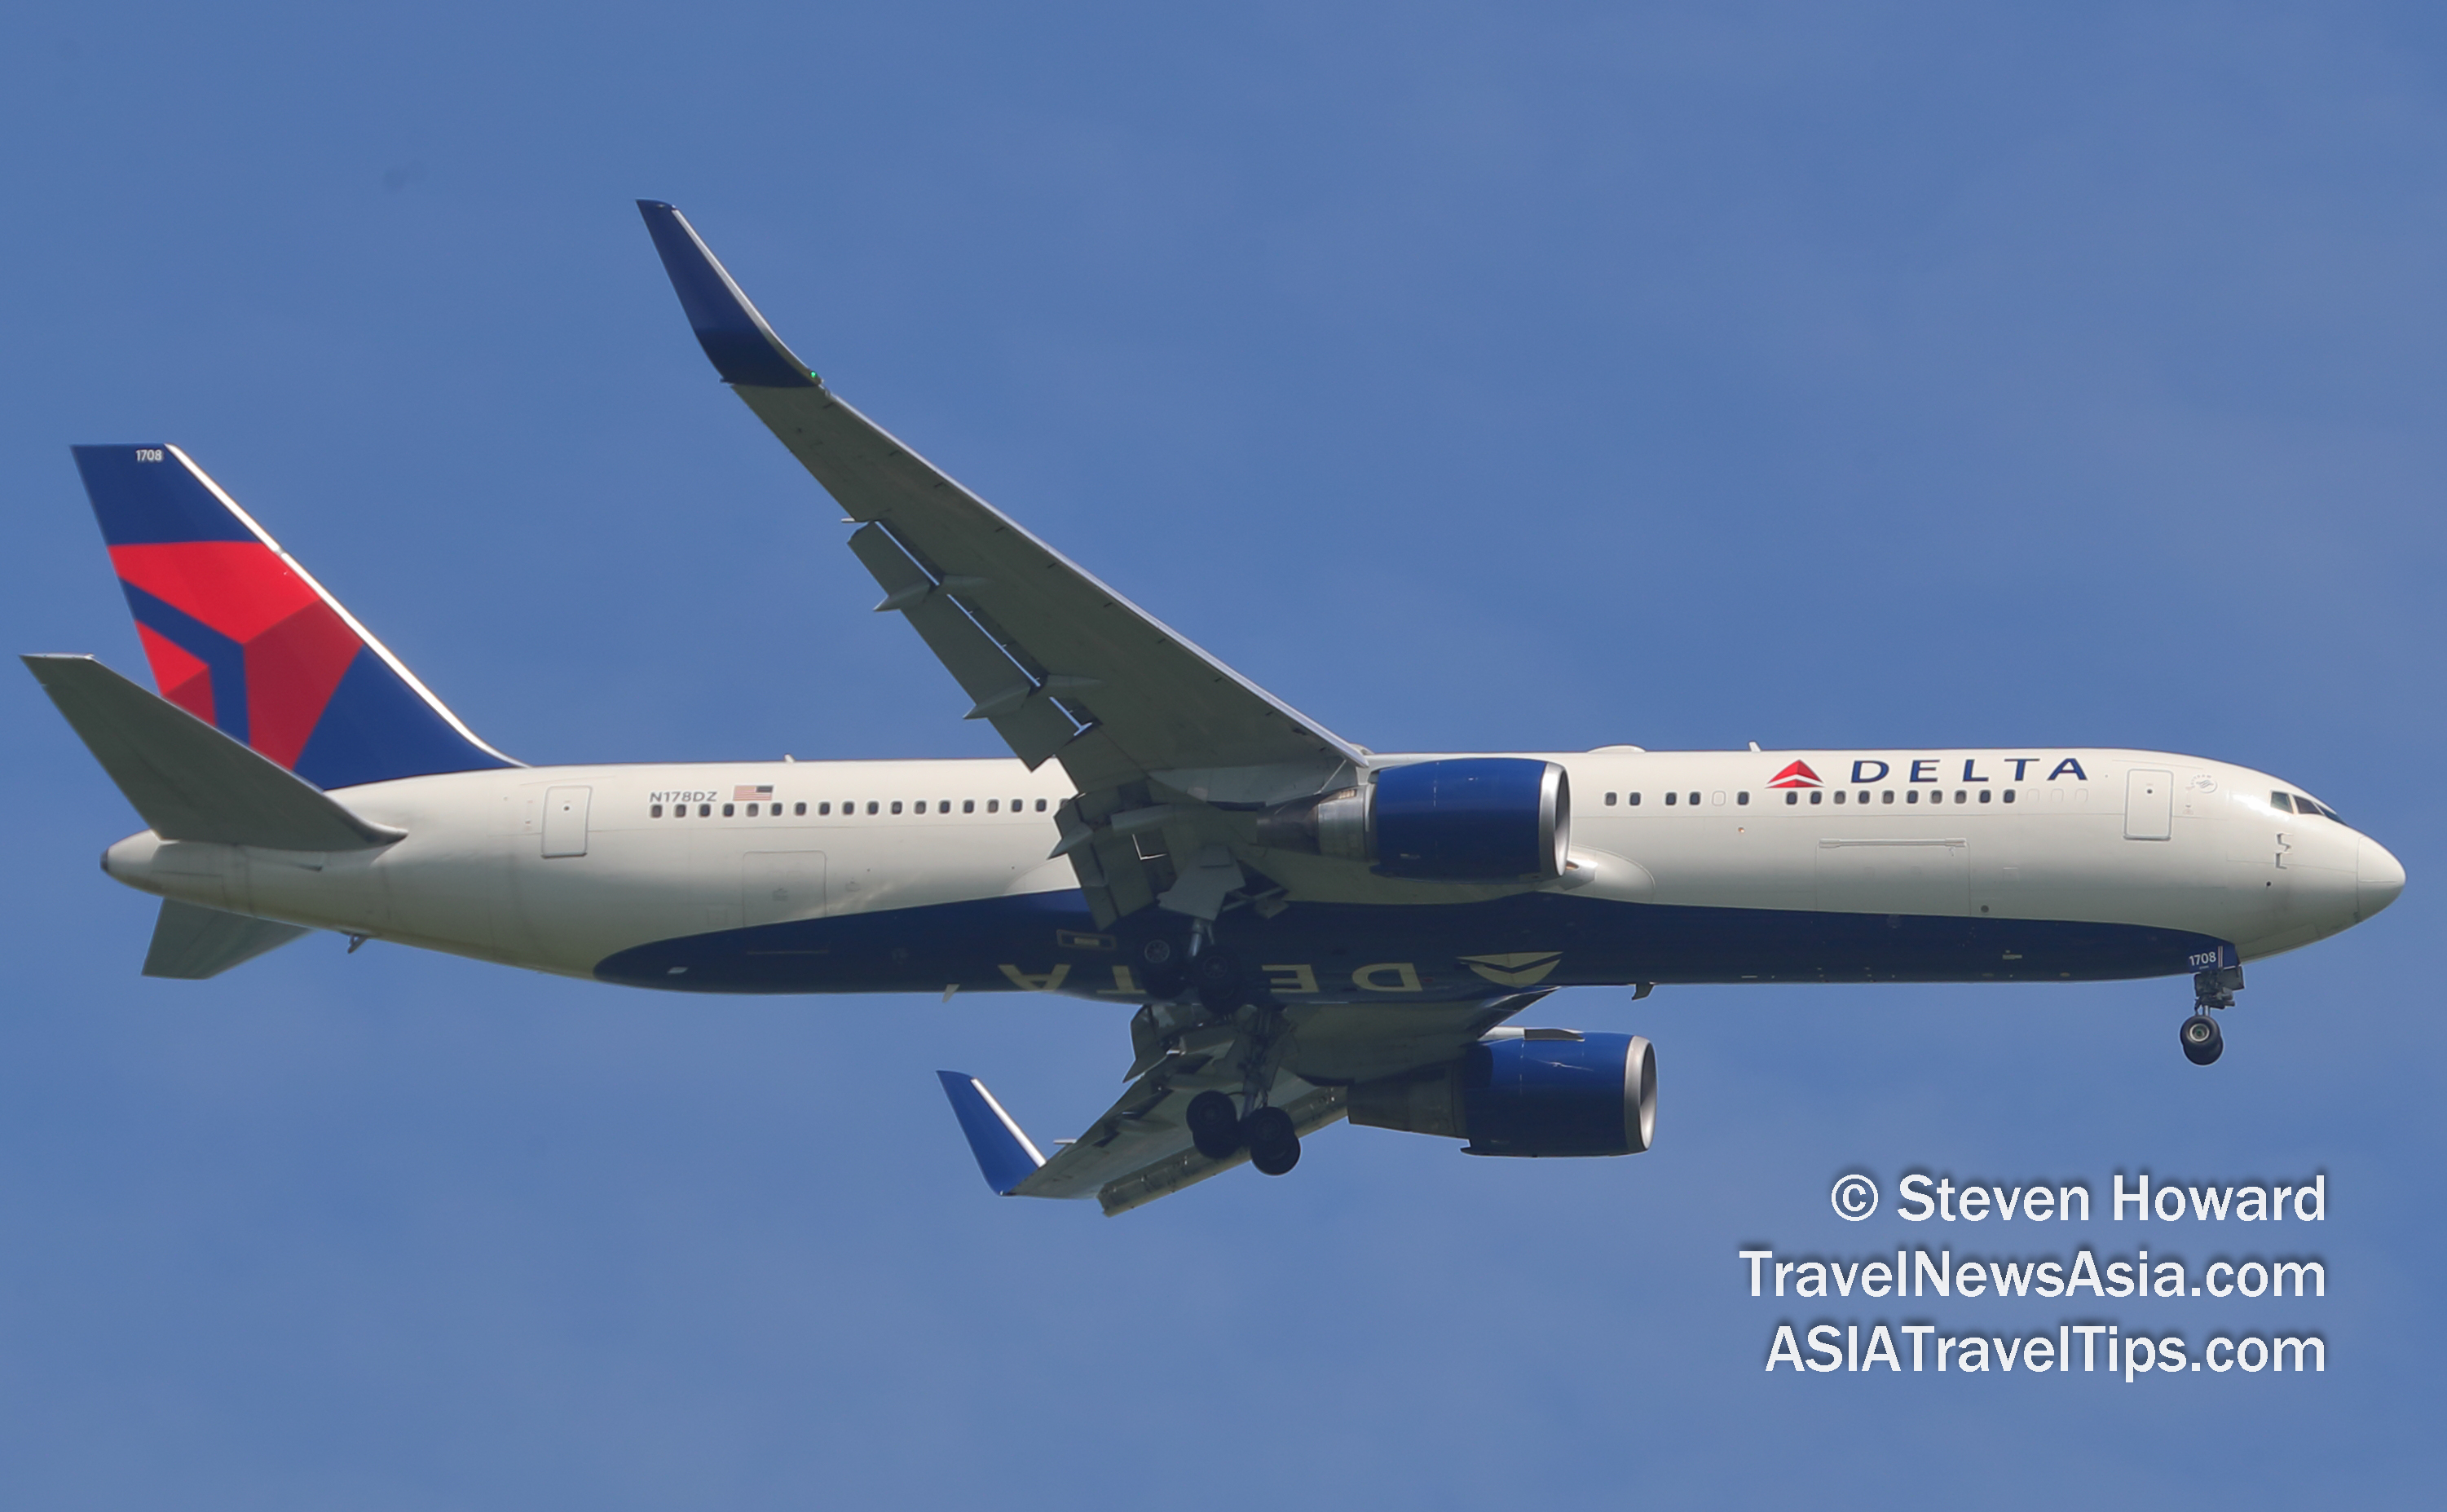 Delta Boeing 767 reg: N178DZ. Picture by Steven Howard of TravelNewsAsia.com Click to enlarge.